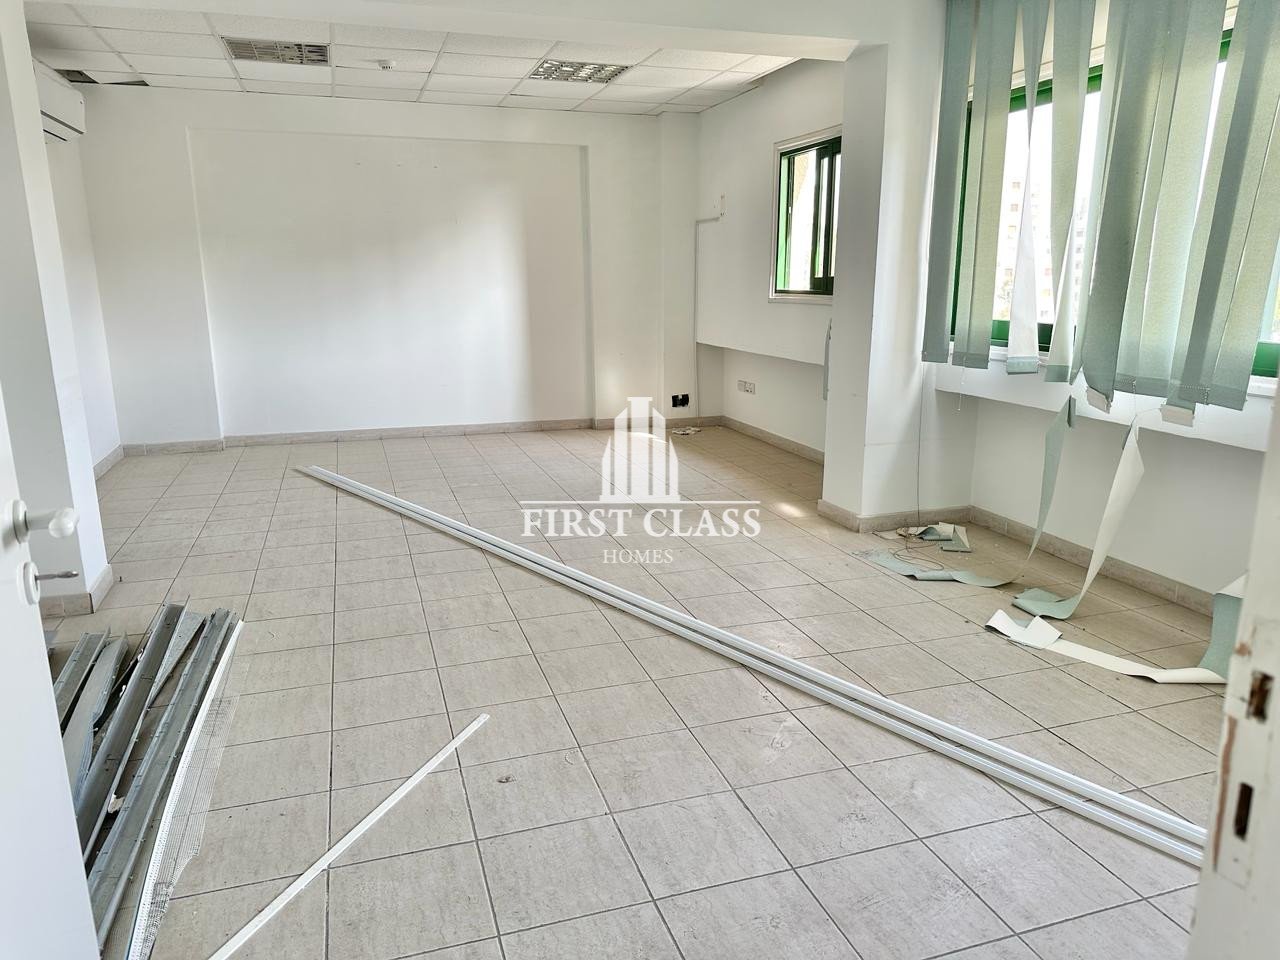 Property for Rent: Commercial (Office) in Agioi Omologites, Nicosia for Rent | Key Realtor Cyprus